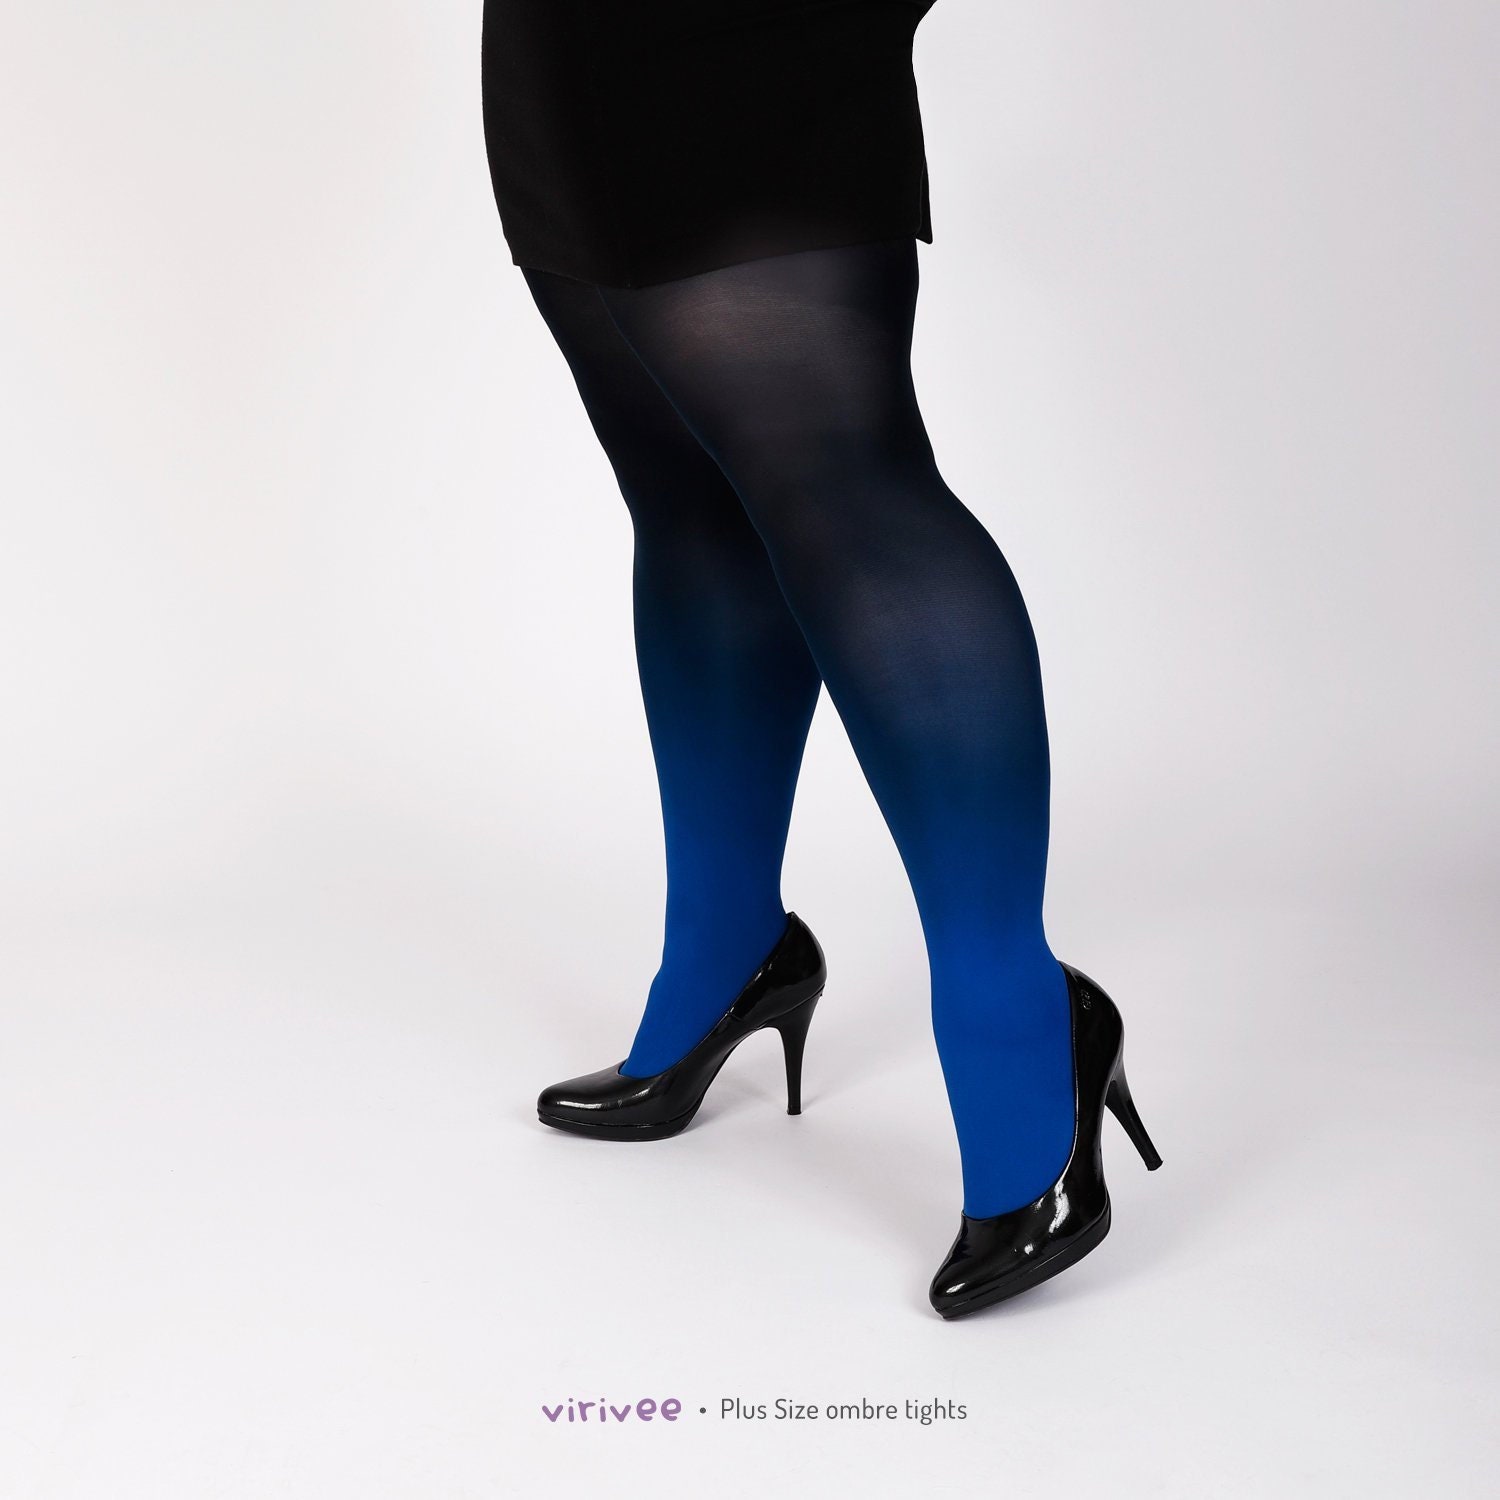 Plus Size Tights for Women Blue-black, Ombre SEMI-OPAQUE Pantyhose